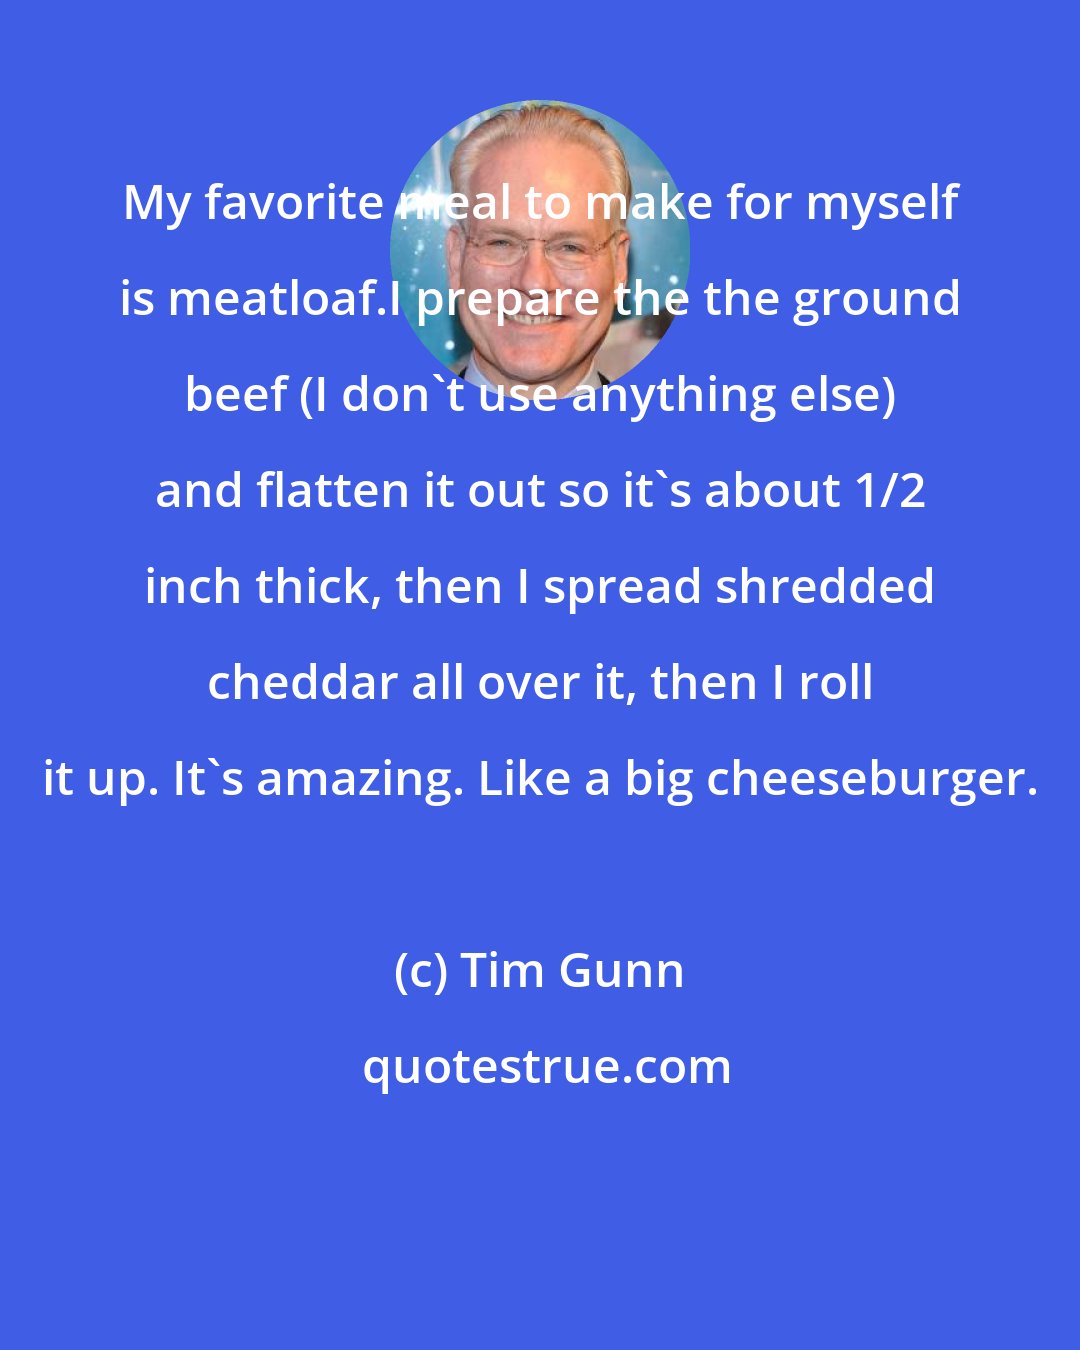 Tim Gunn: My favorite meal to make for myself is meatloaf.I prepare the the ground beef (I don't use anything else) and flatten it out so it's about 1/2 inch thick, then I spread shredded cheddar all over it, then I roll it up. It's amazing. Like a big cheeseburger.